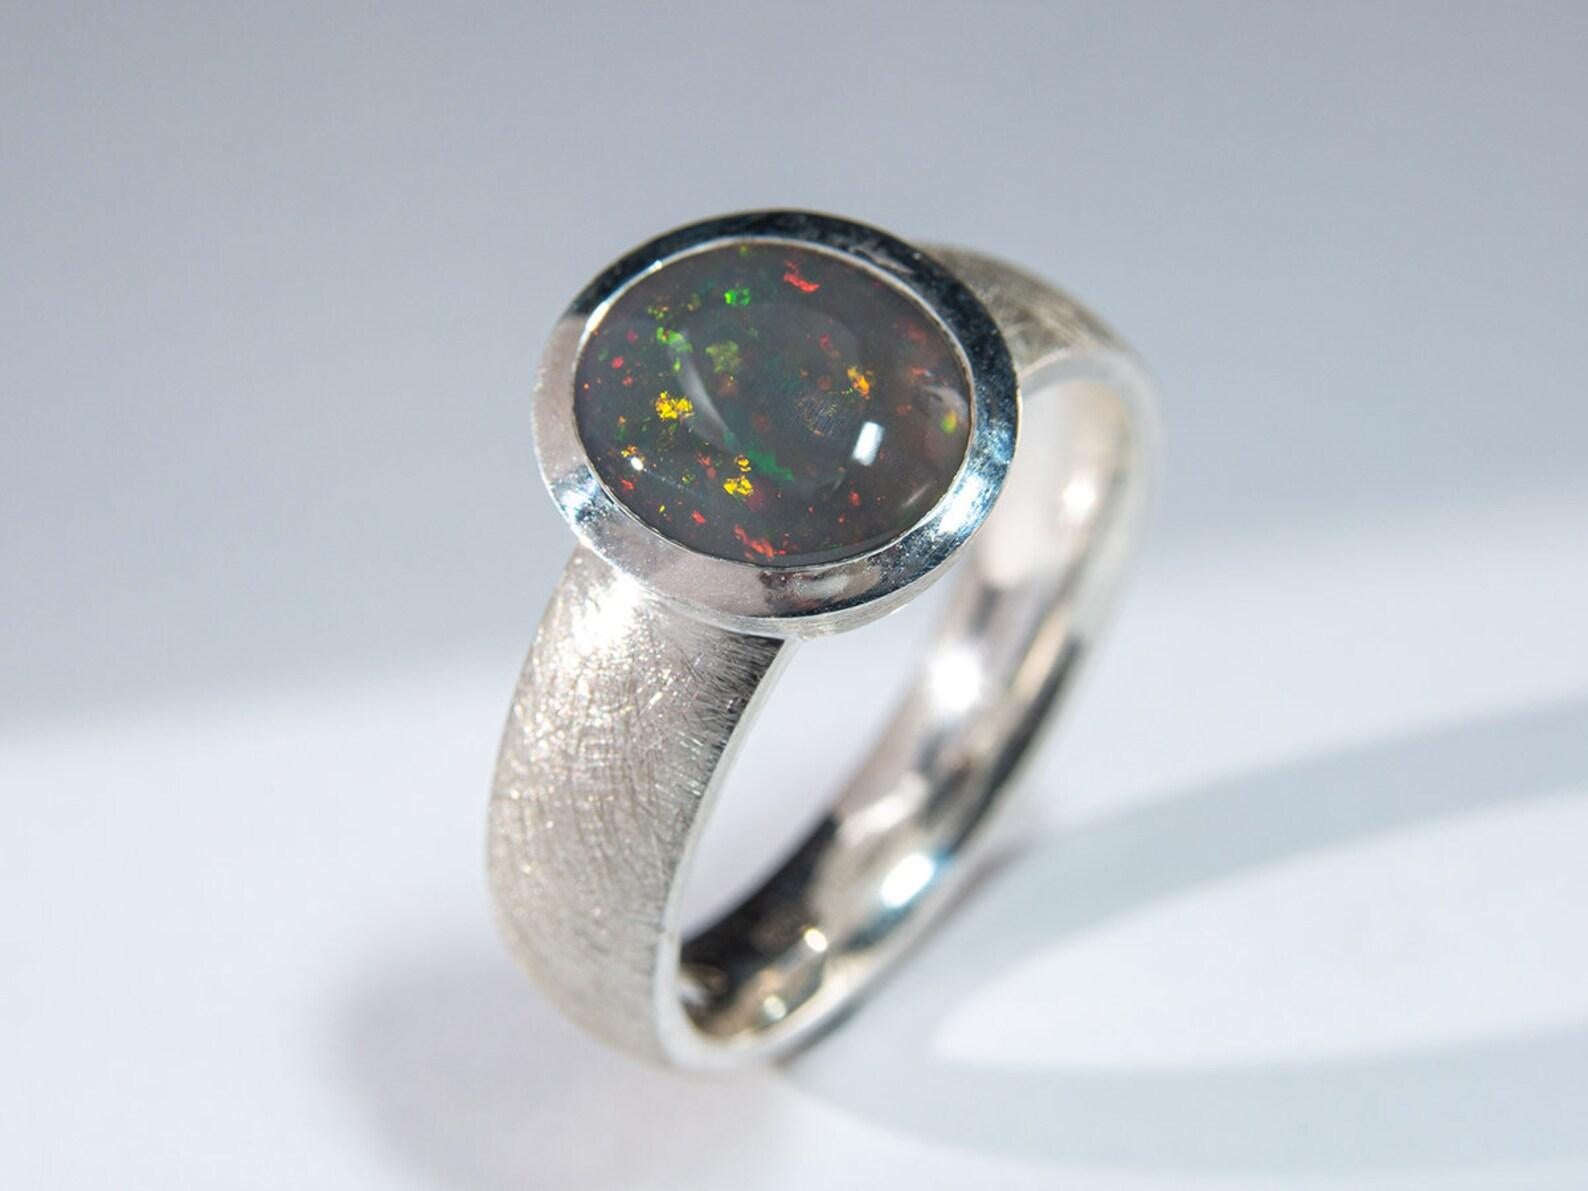 Silver ring with natural Dark Opal
opal origin - Australia
stone measurements - 0.35 х 0.39 in / 9 х 10 mm
stone weight - 1.5 carats
ring weight - 6.16 grams
ring size - 9 US